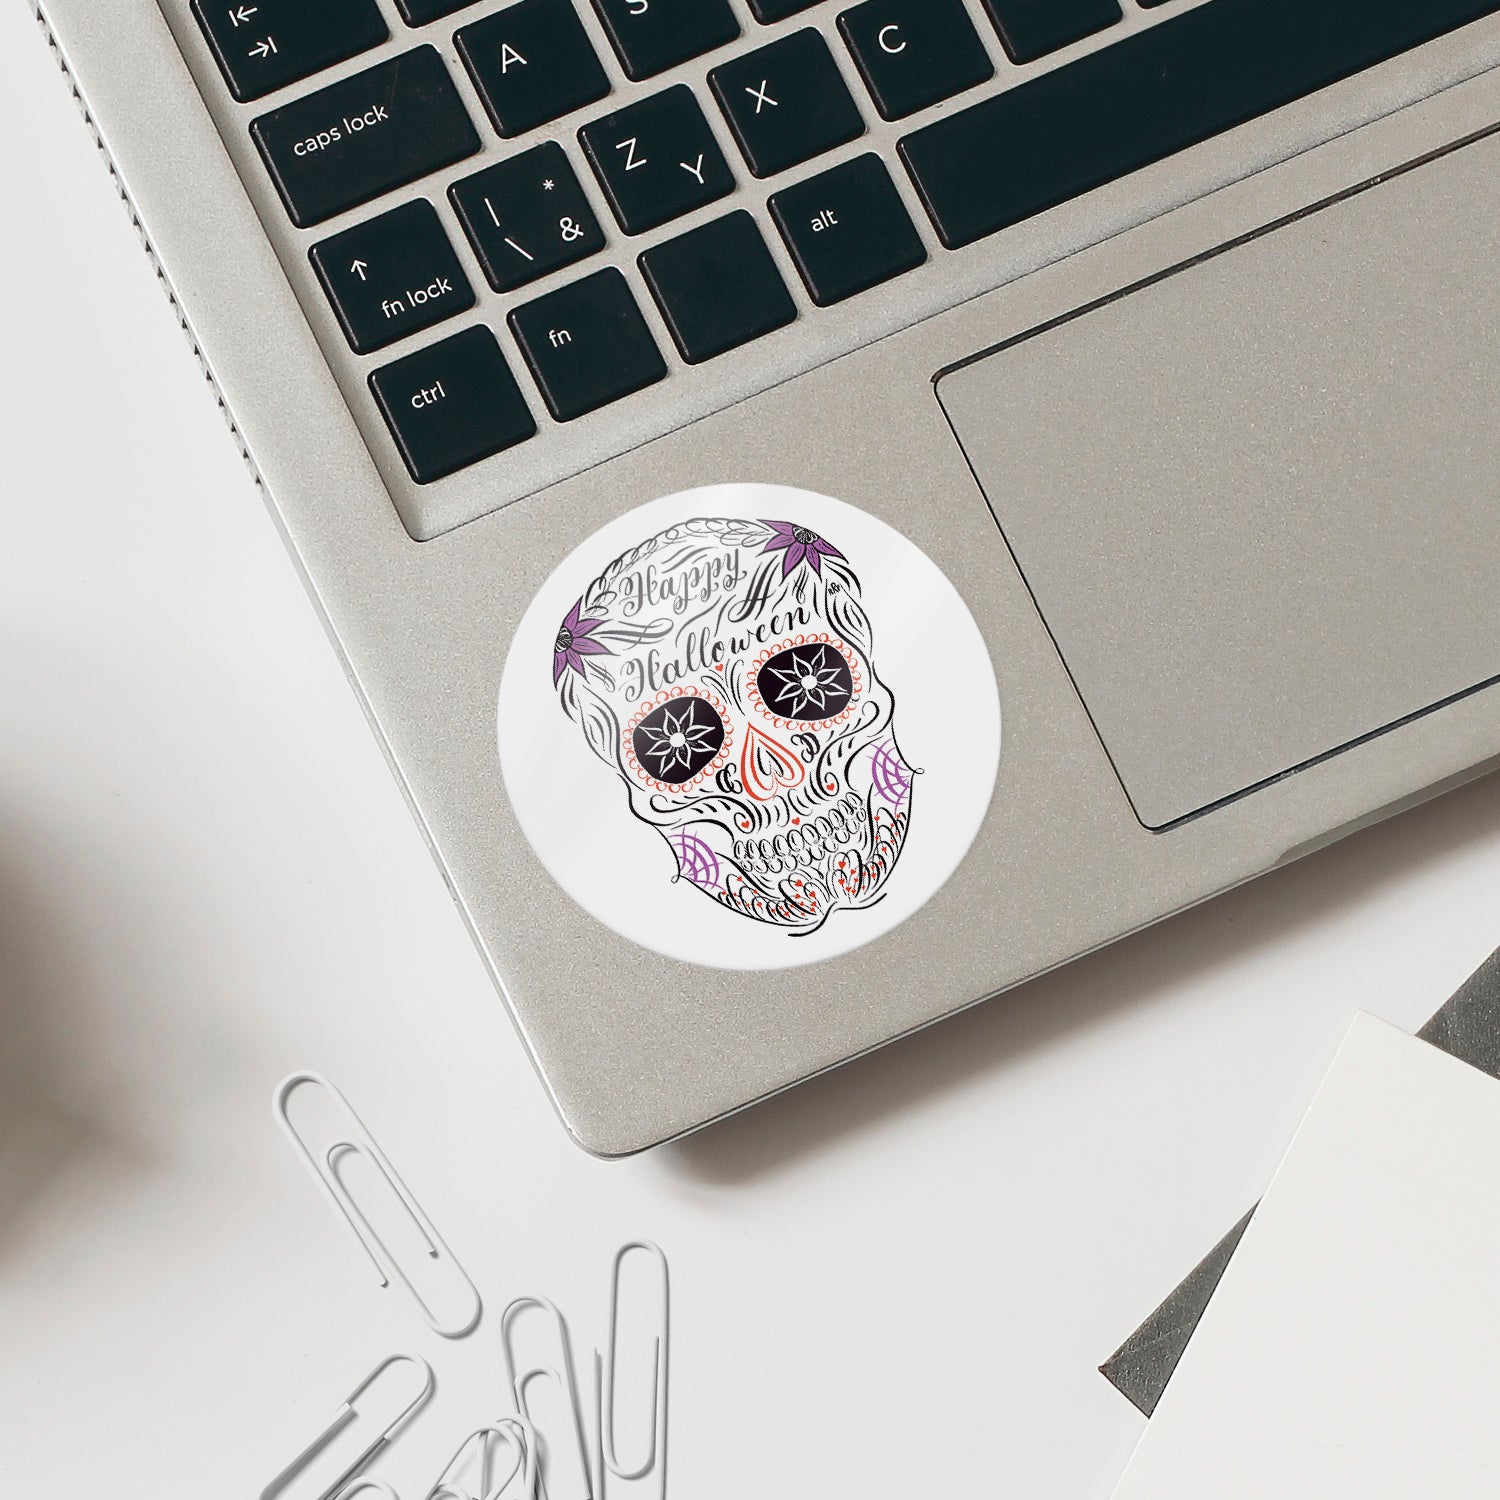 Lifestyle sticker application image: sugar skull, calligraphic drawing